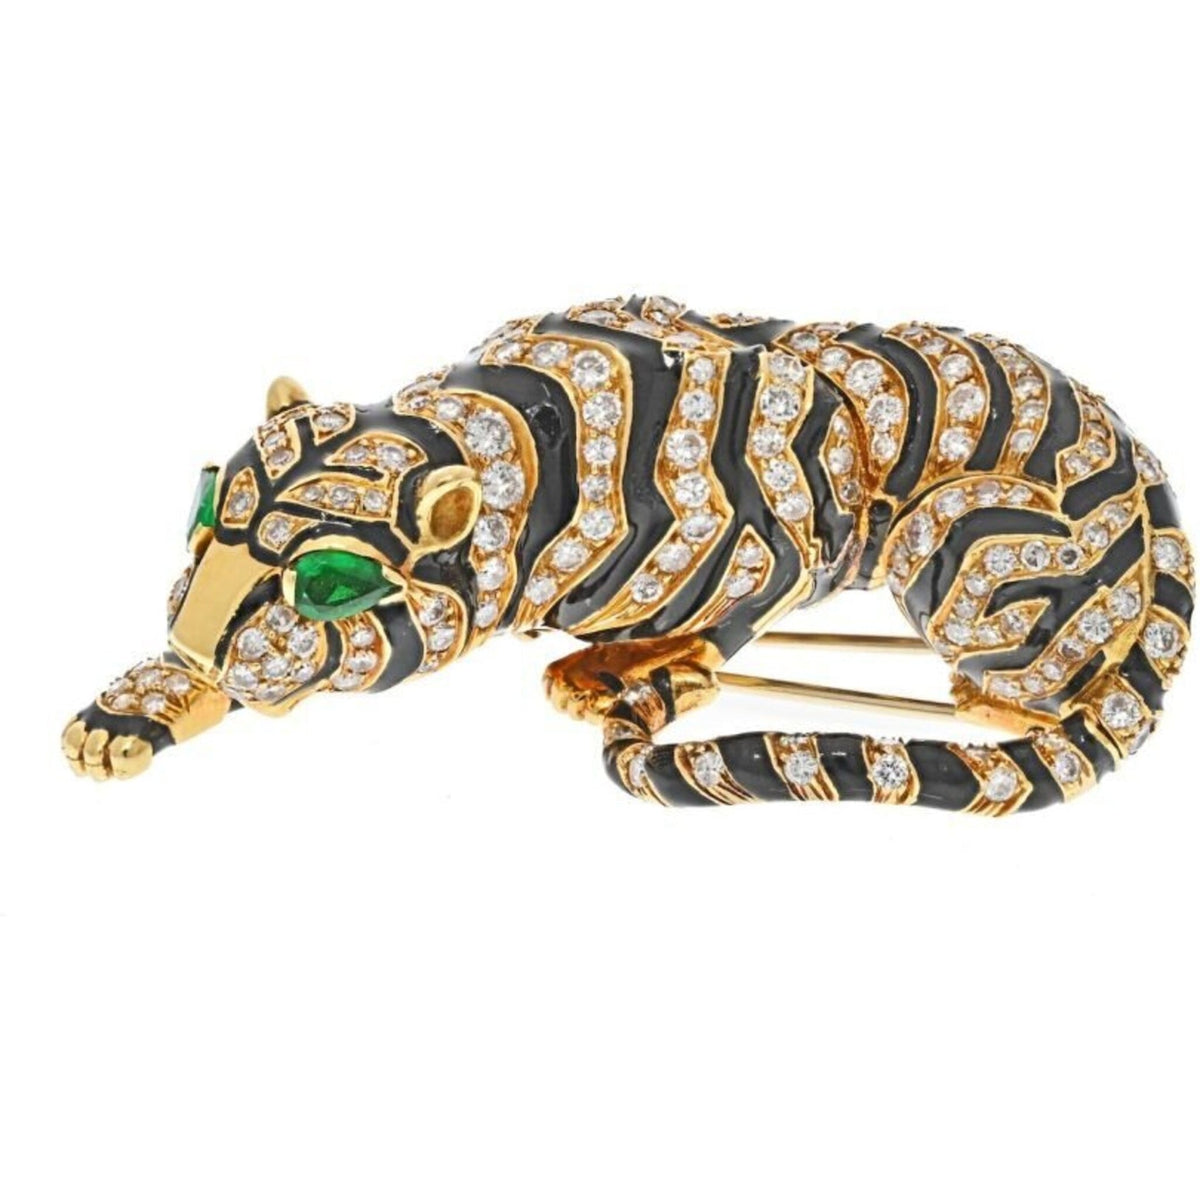 Exquisite Tiger Pendant at Robinson's Jewelers